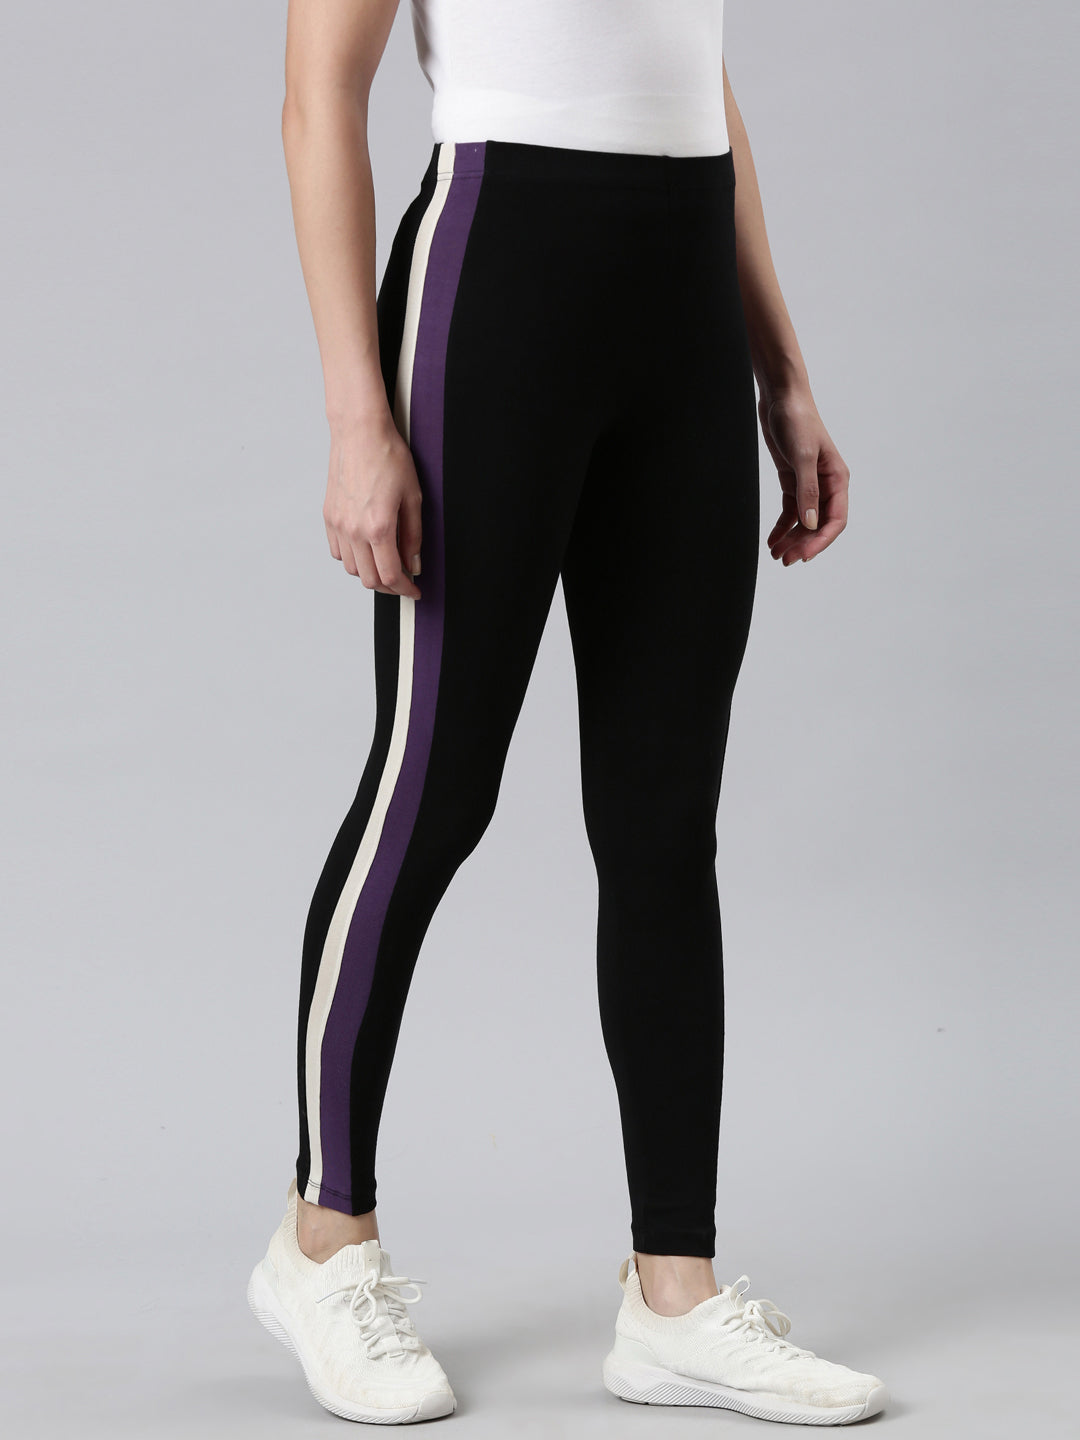 United Classic Purple Black Abstract Print Workout Leggings